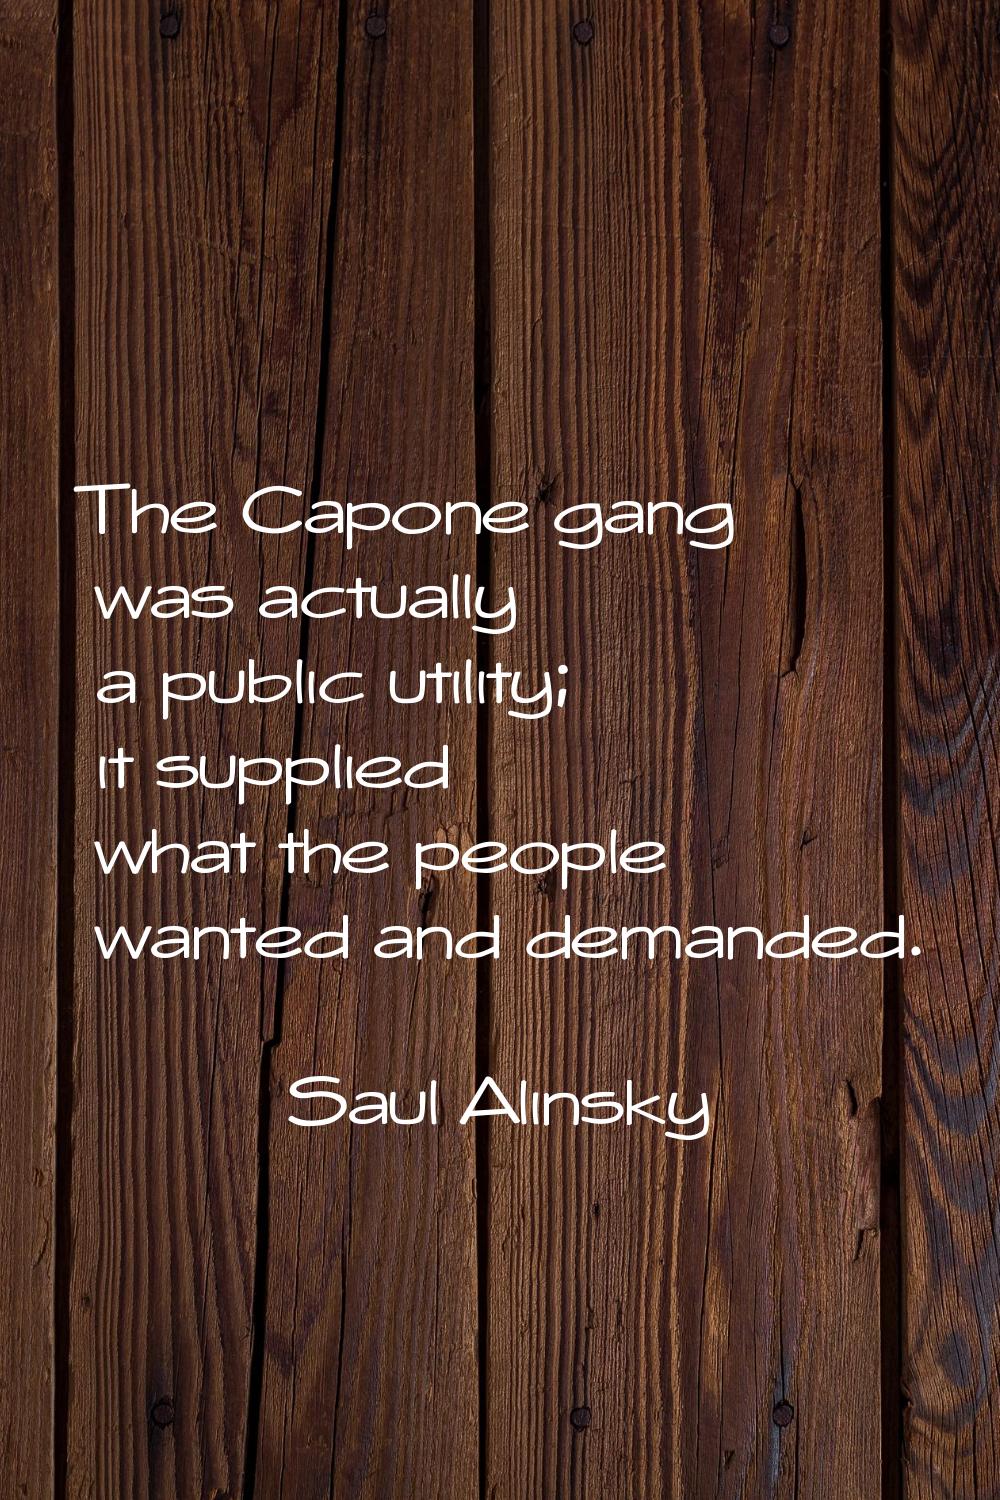 The Capone gang was actually a public utility; it supplied what the people wanted and demanded.